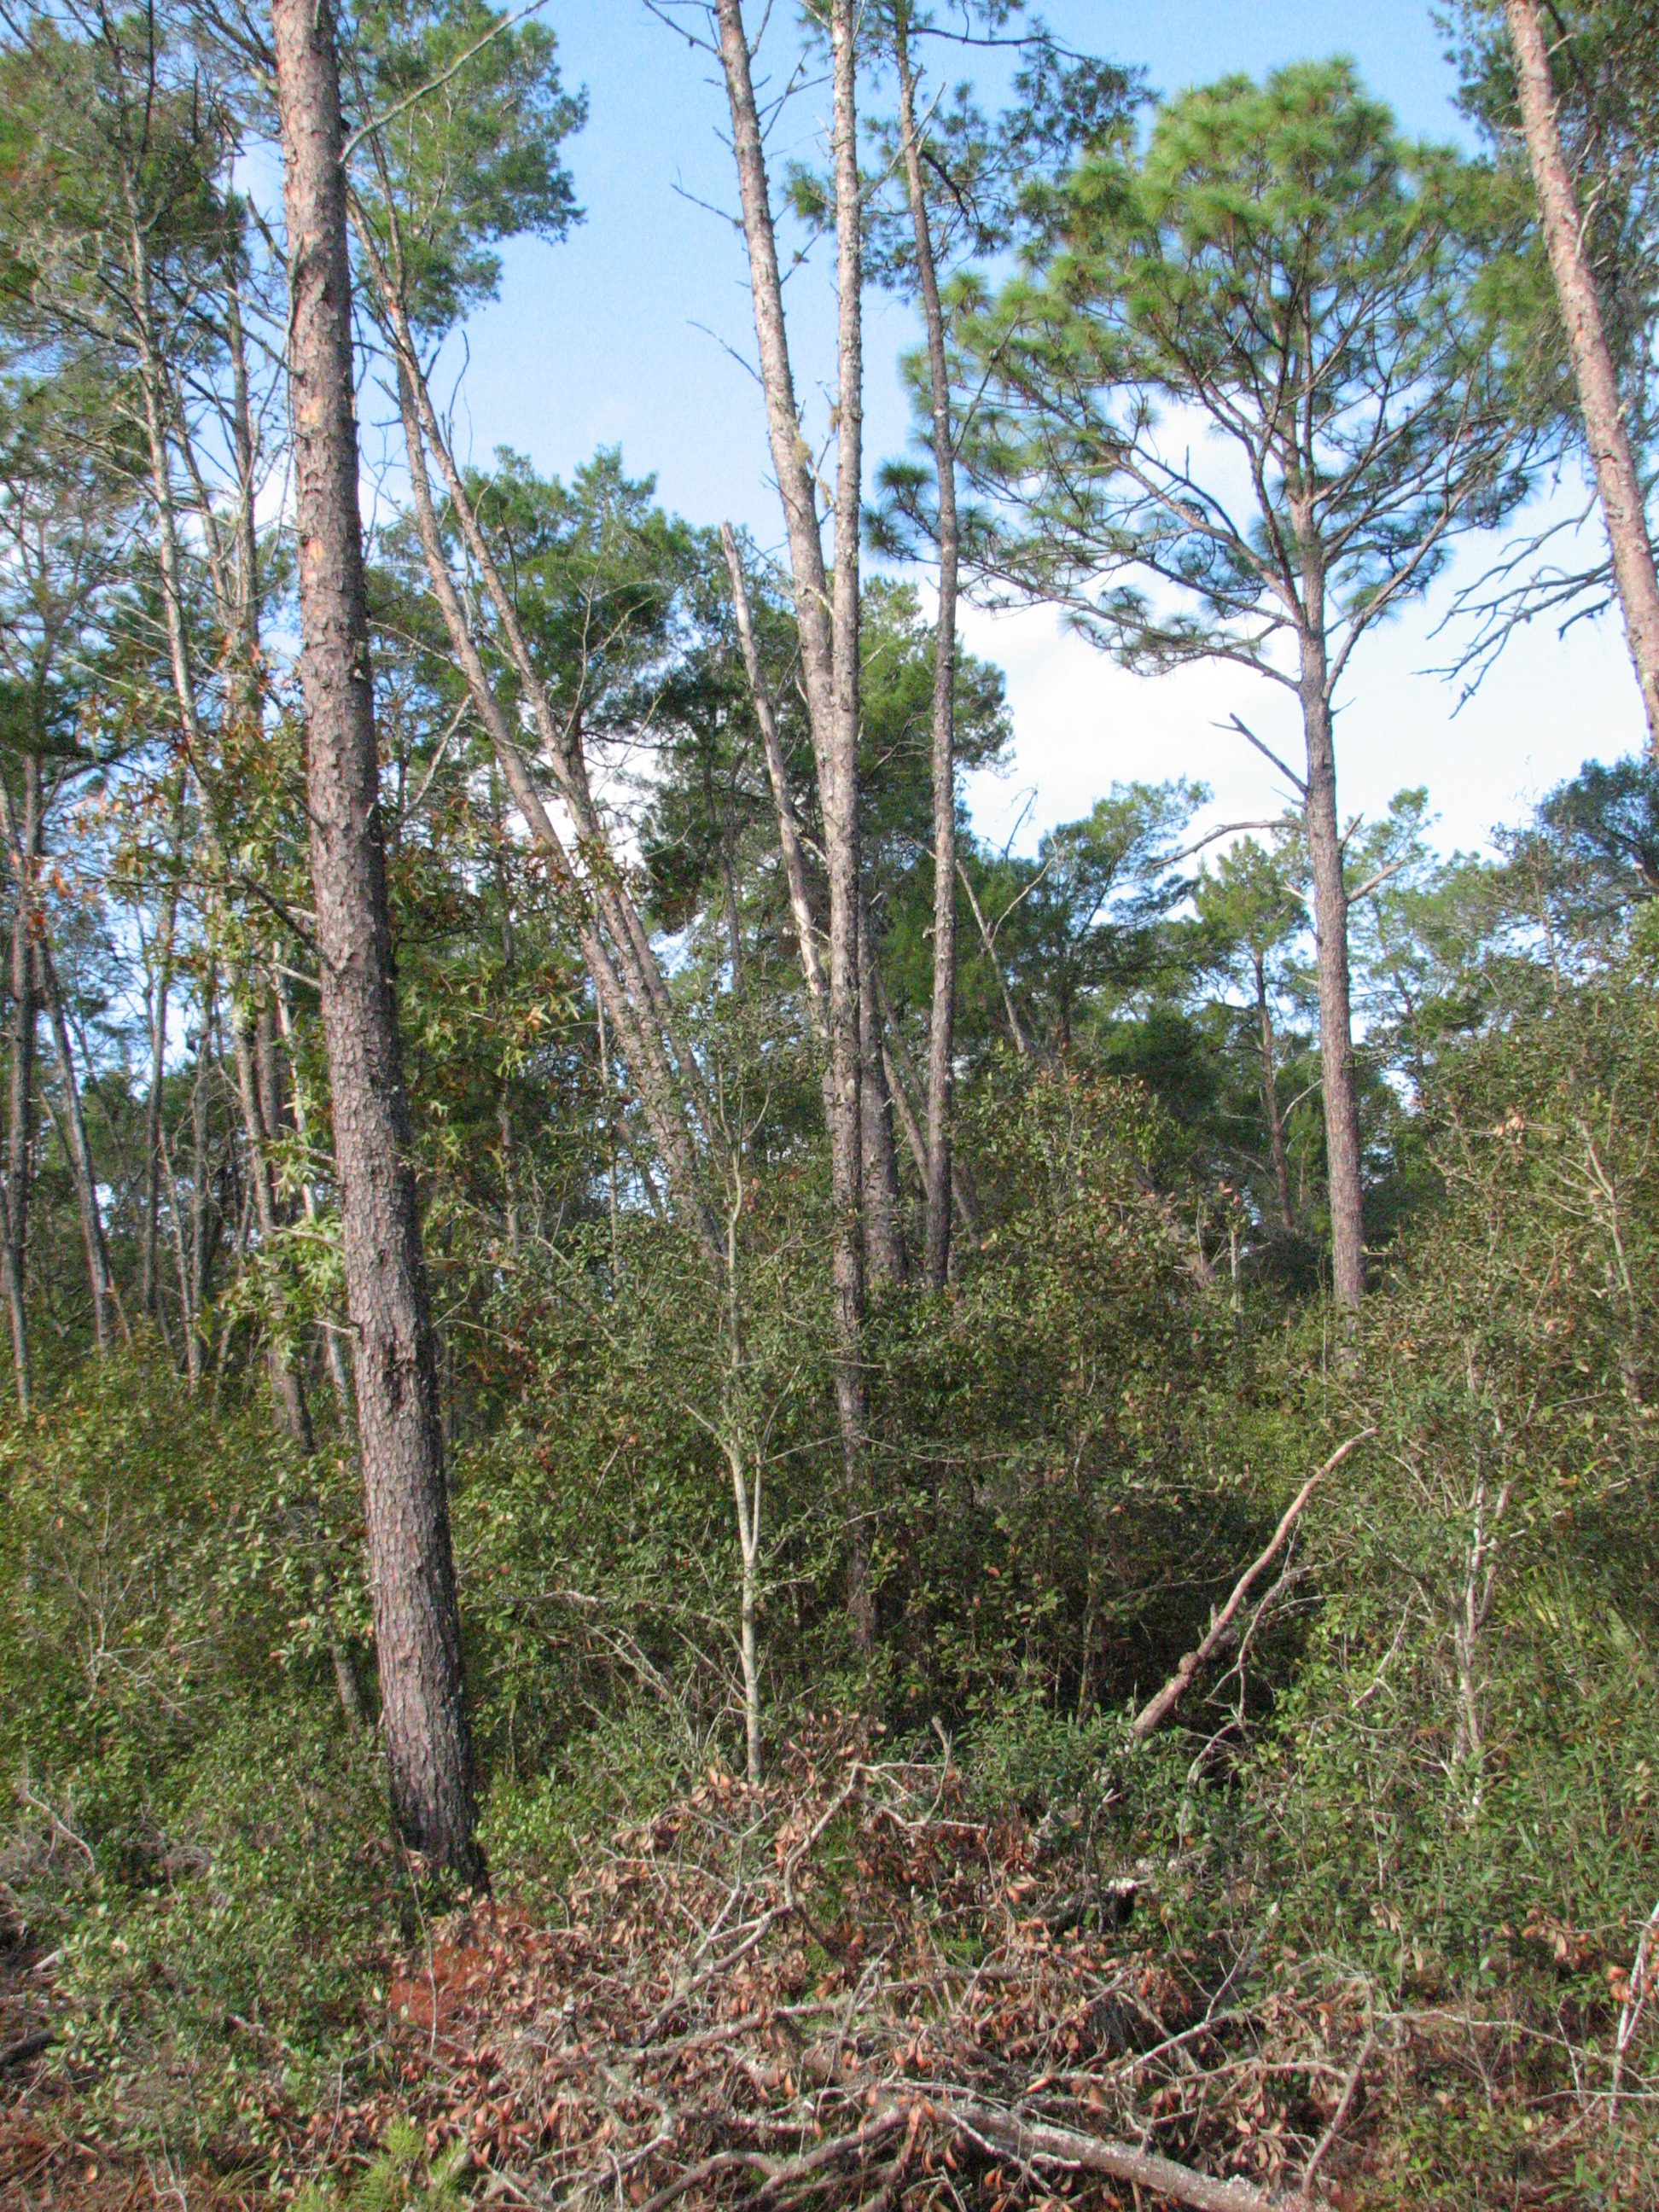 Dense, tall sand pines form a canopy before restoration of the property.